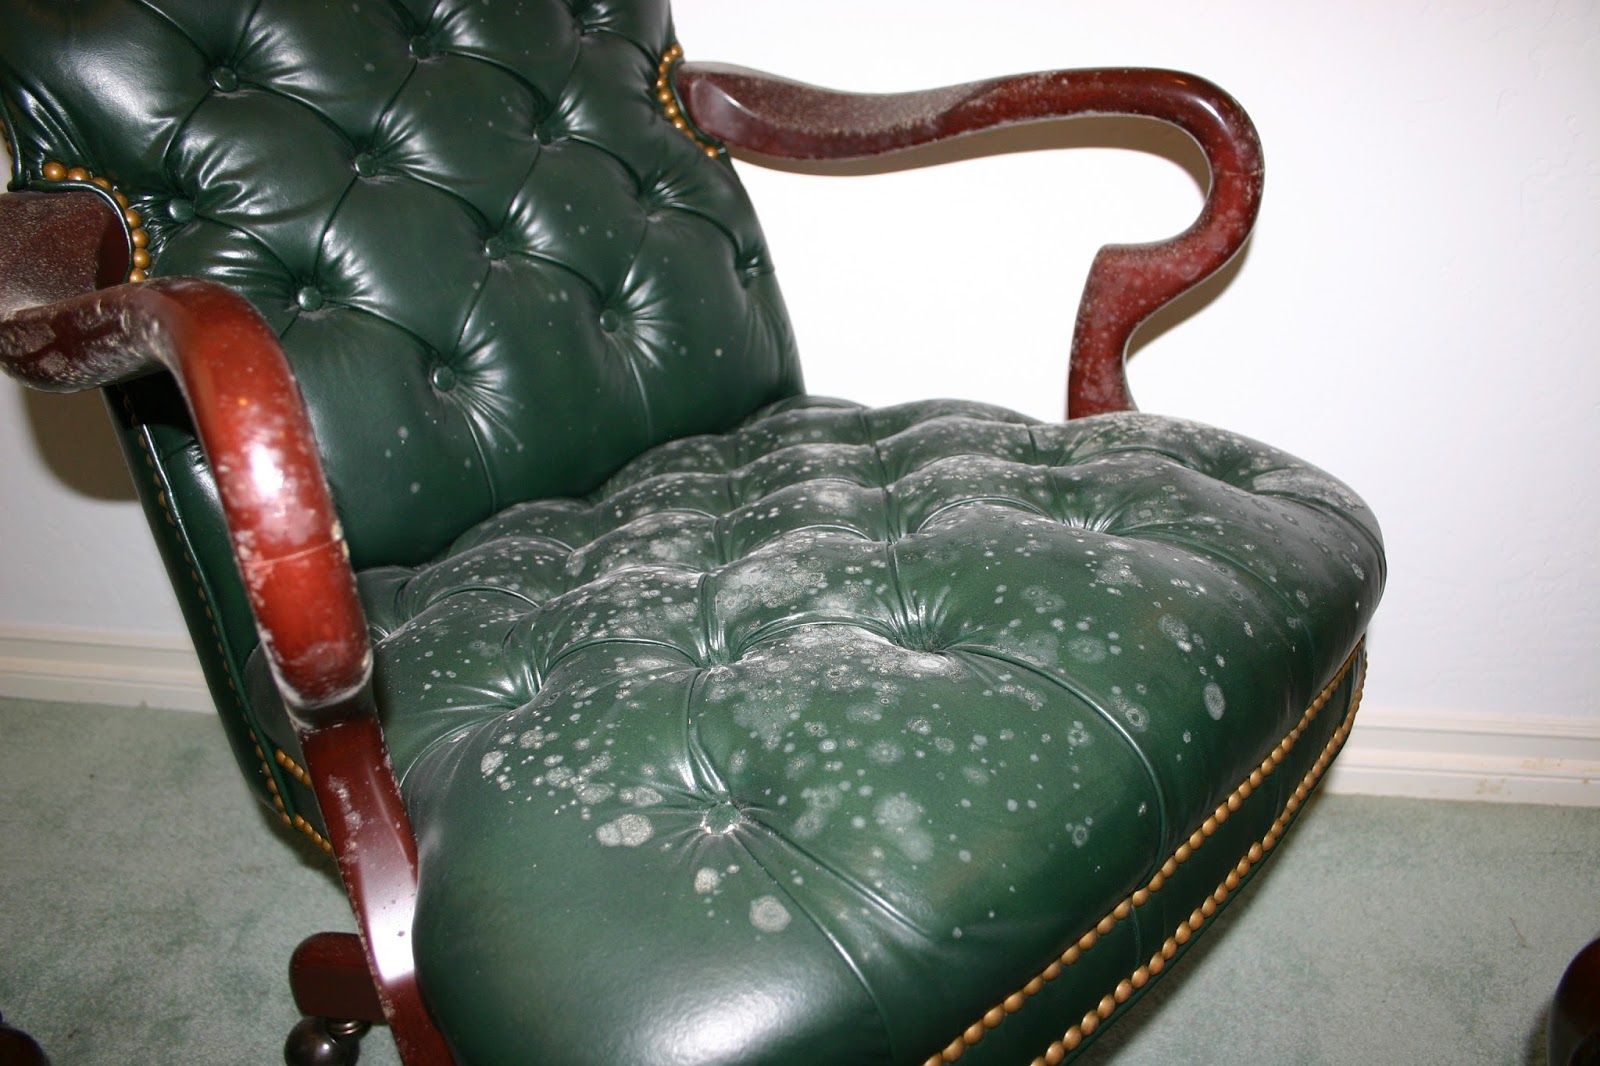 How to Remove Mold from Leather